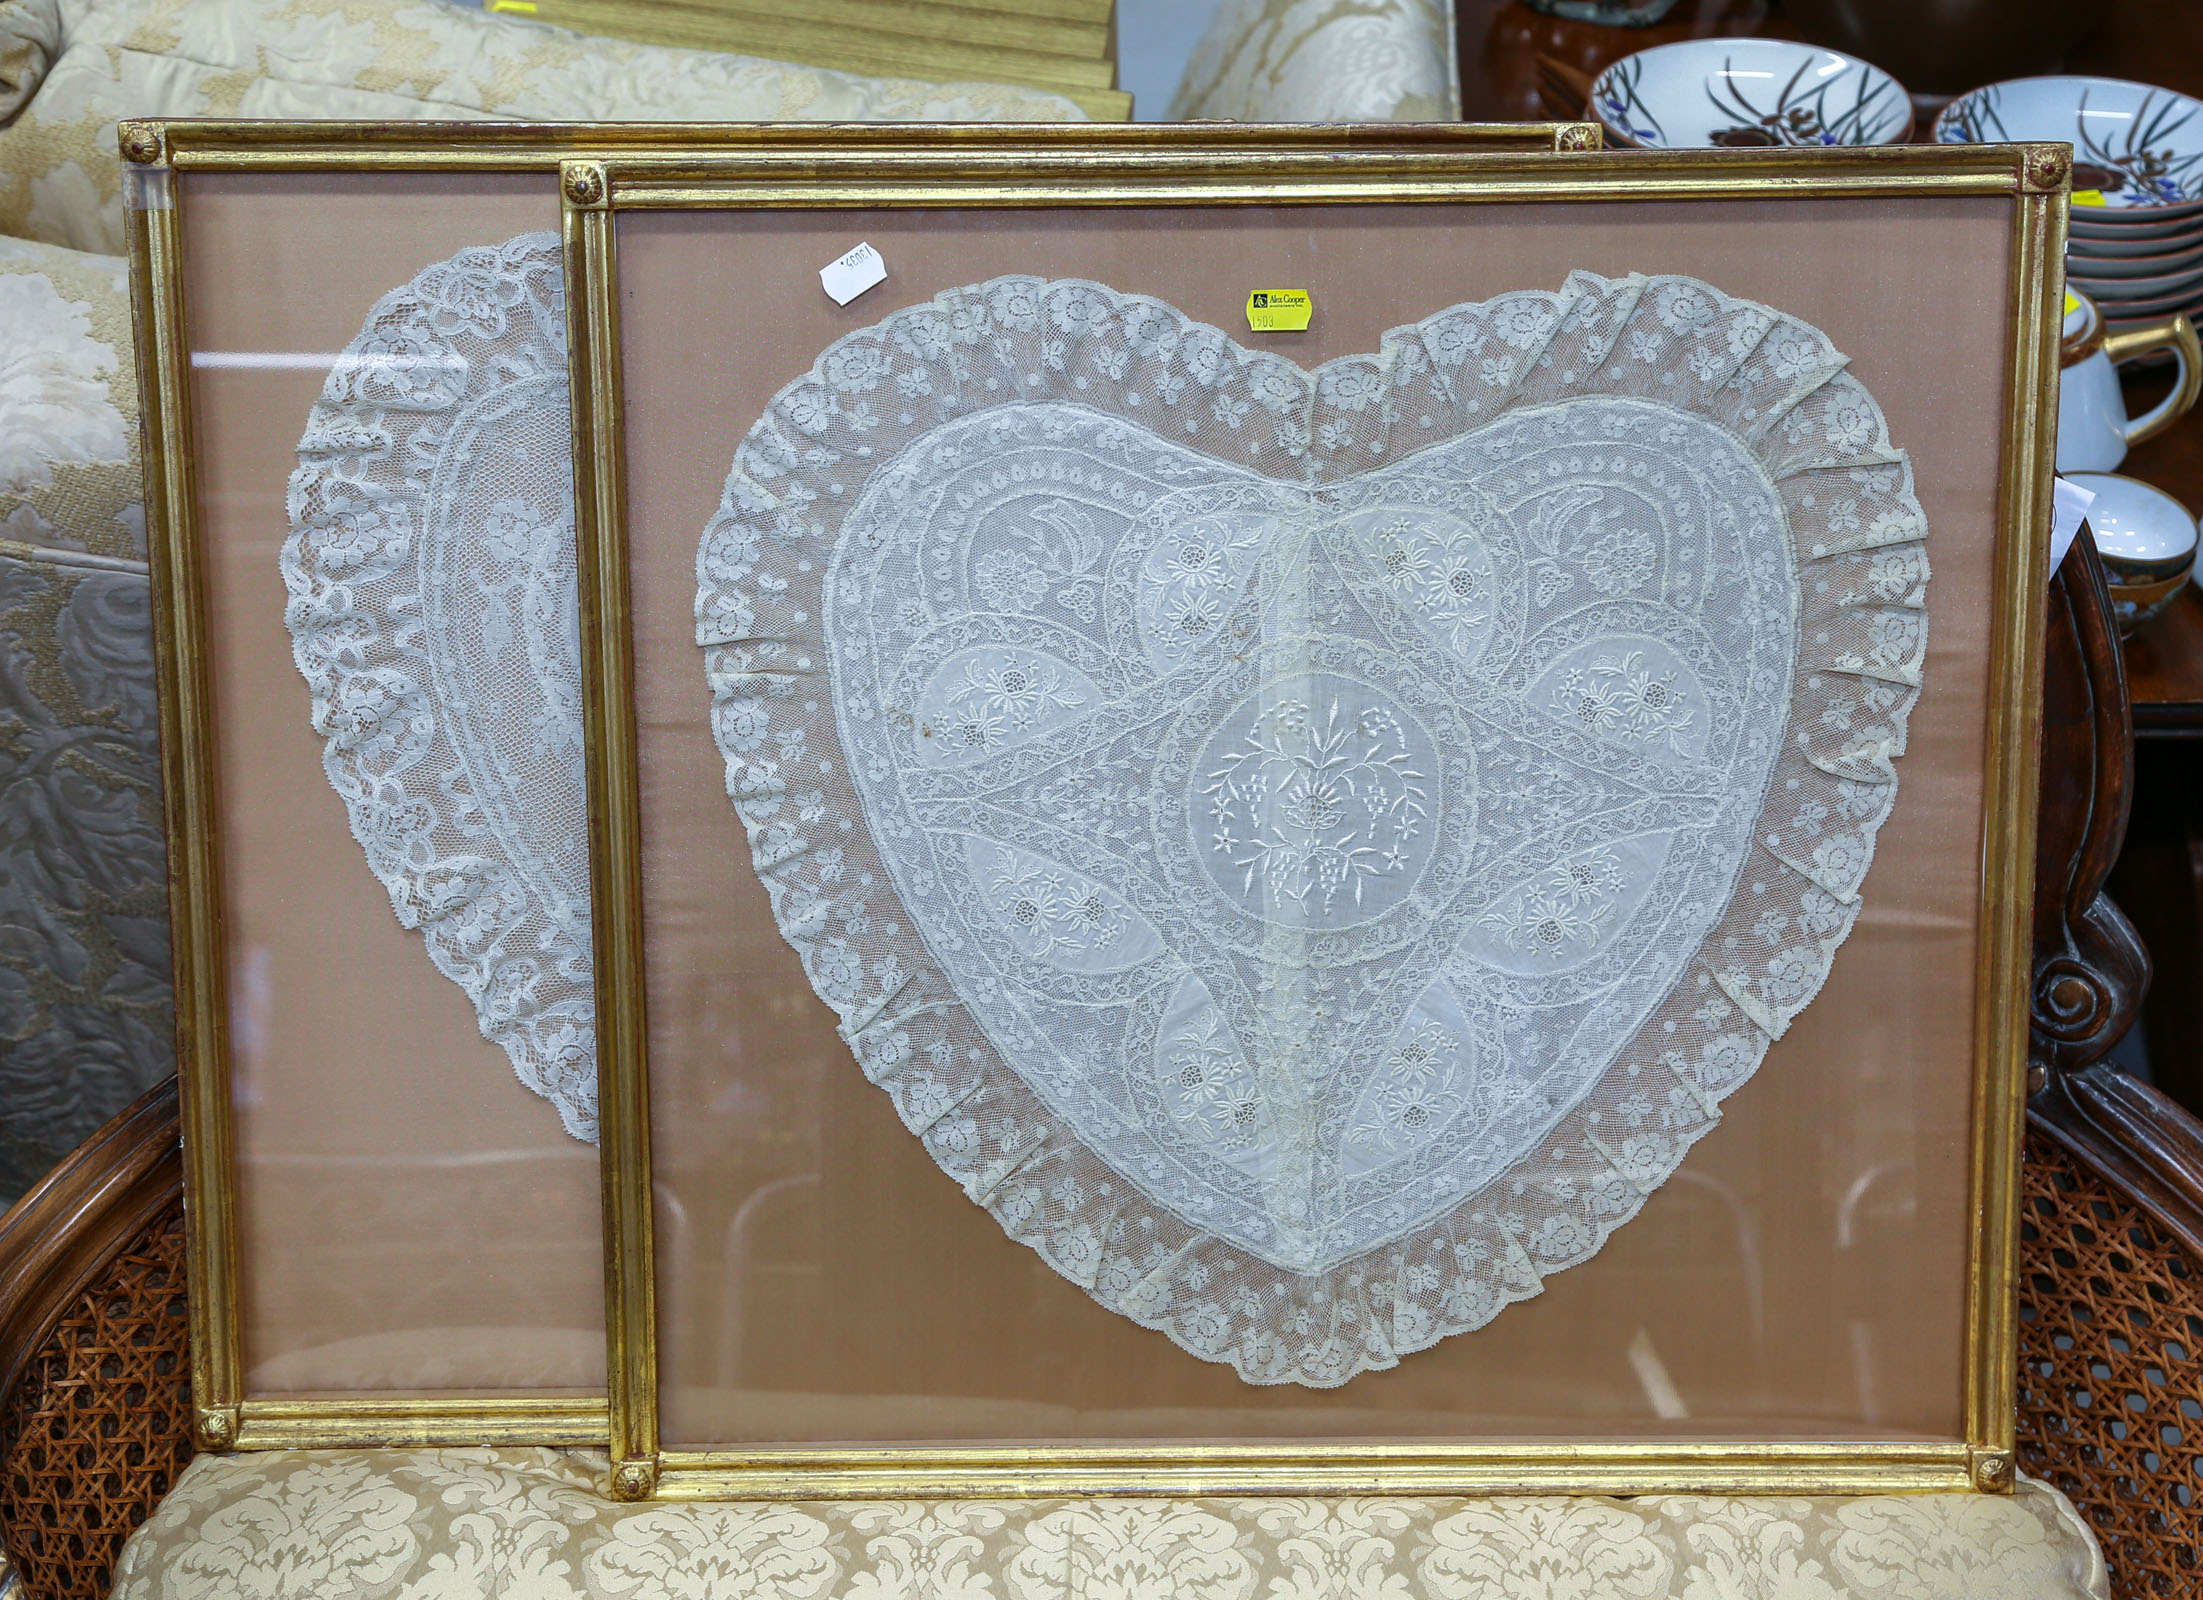 A NEAR-PAIR OF FRAMED EMBROIDERED